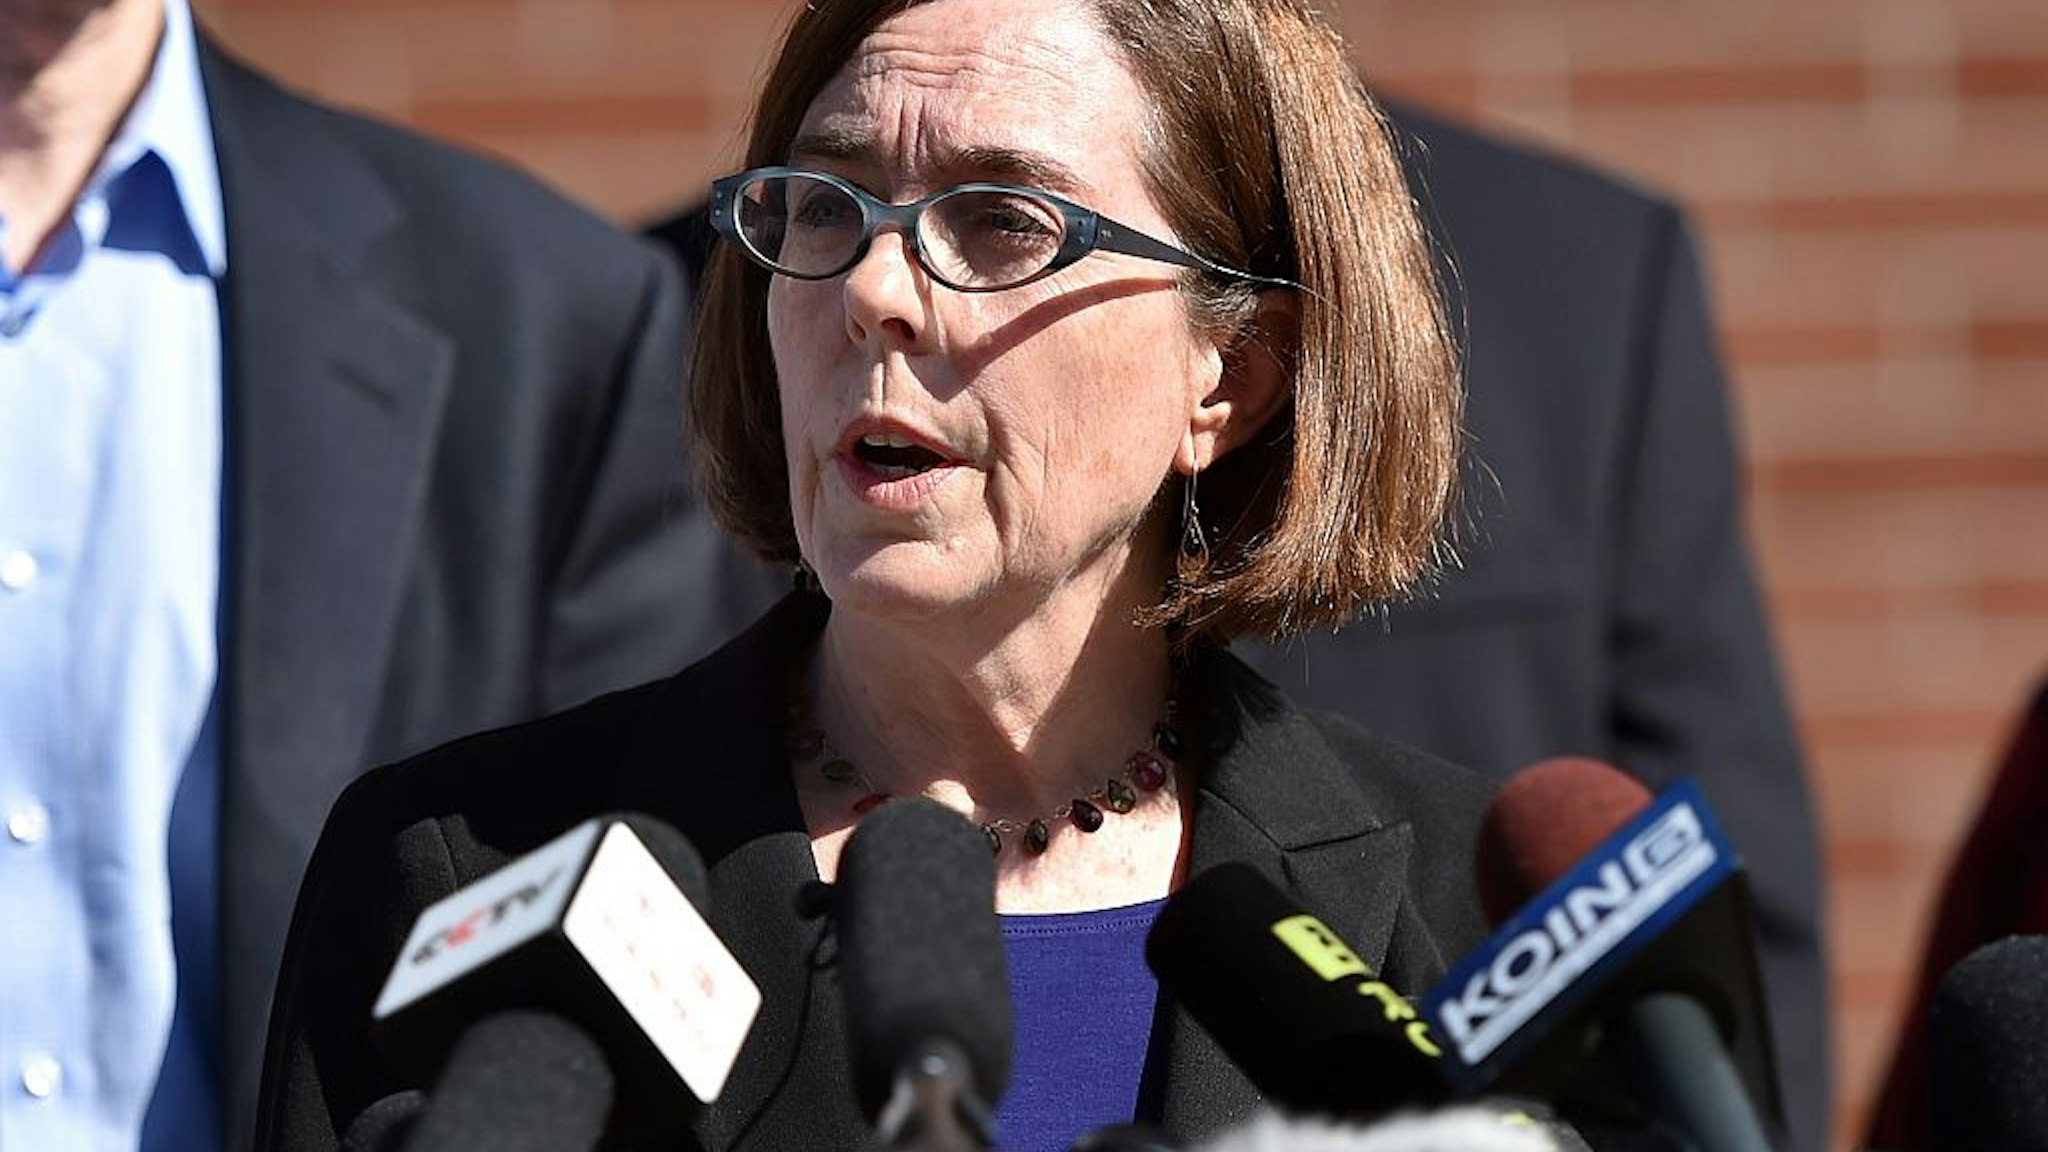 Oregon Governor Kate Brown reacts during a press conference in Roseburg, Oregon on October 2, 2015.